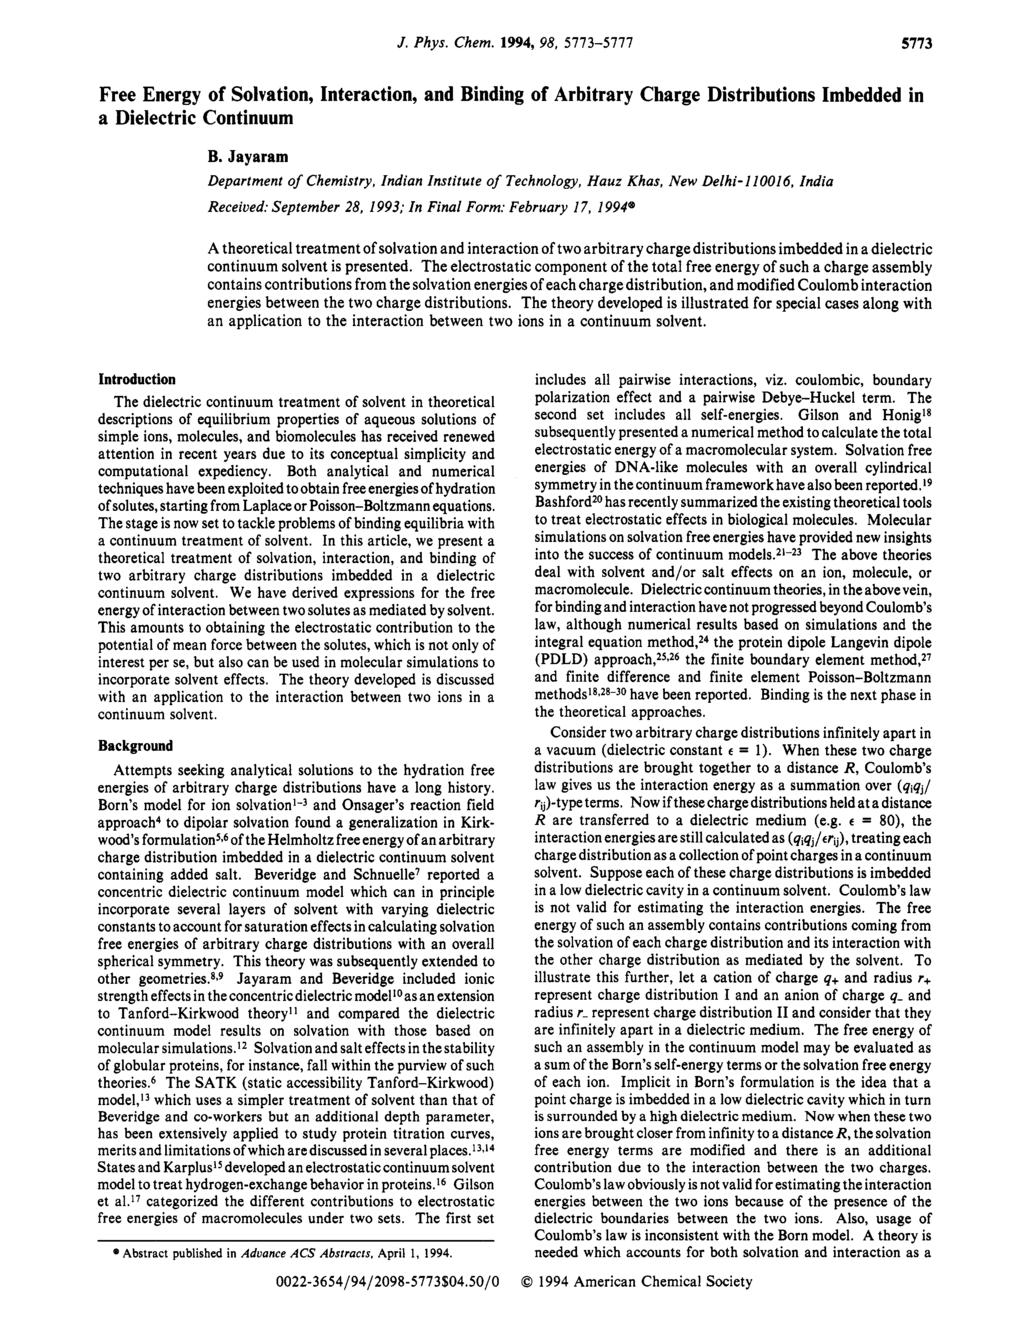 J. Phys. Chem. 1994, 98, 5113-5111 5773 Free Energy of Solvation, Interaction, and Binding of Arbitrary Charge Distributions Imbedded in a Dielectric Continuum B.